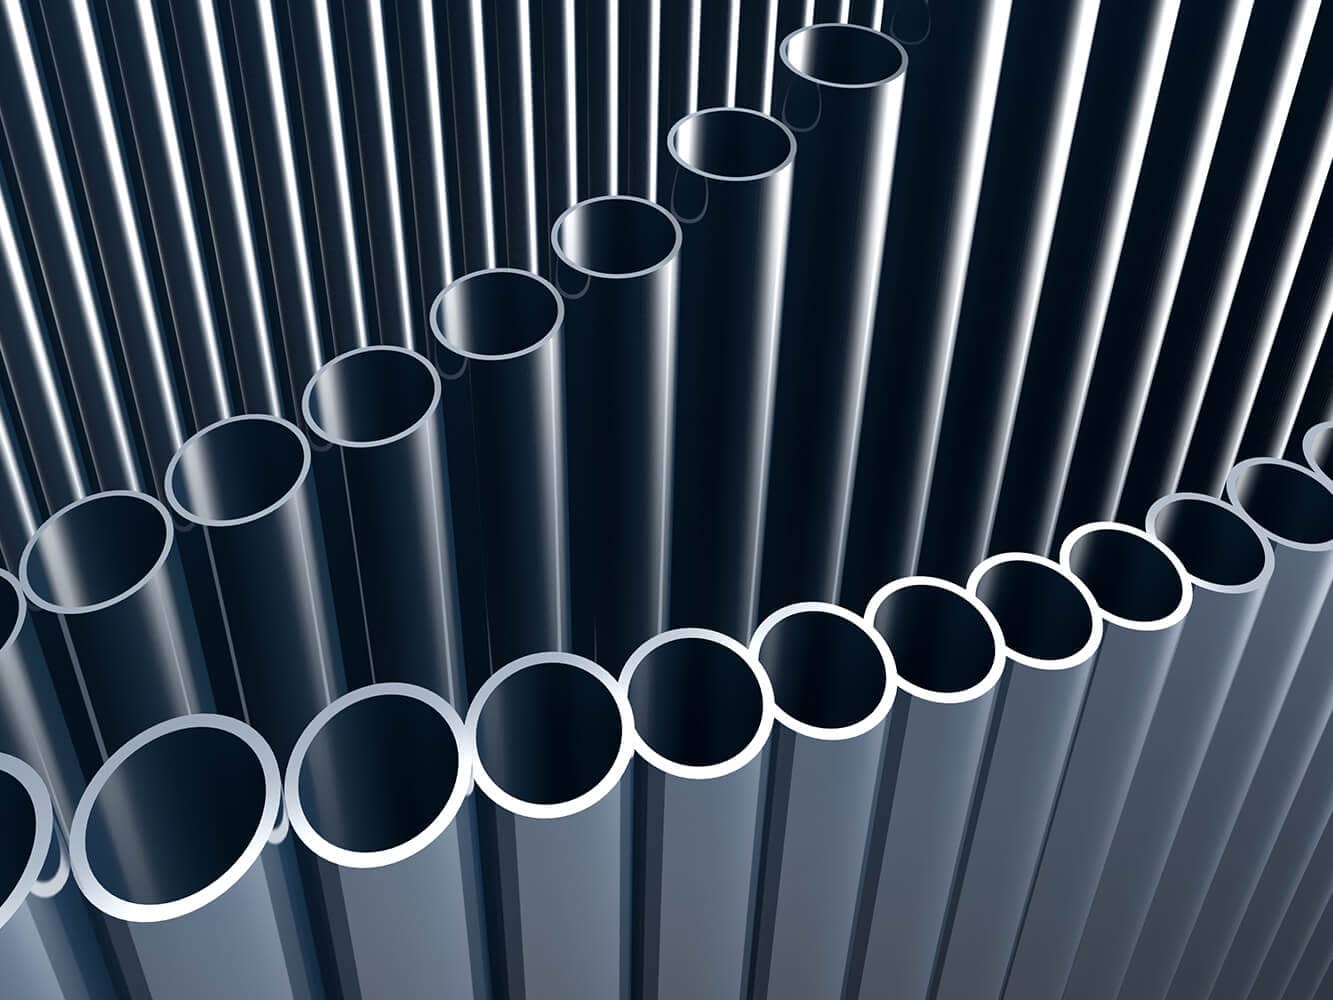 Manufacturer of seamless tubes and pipes